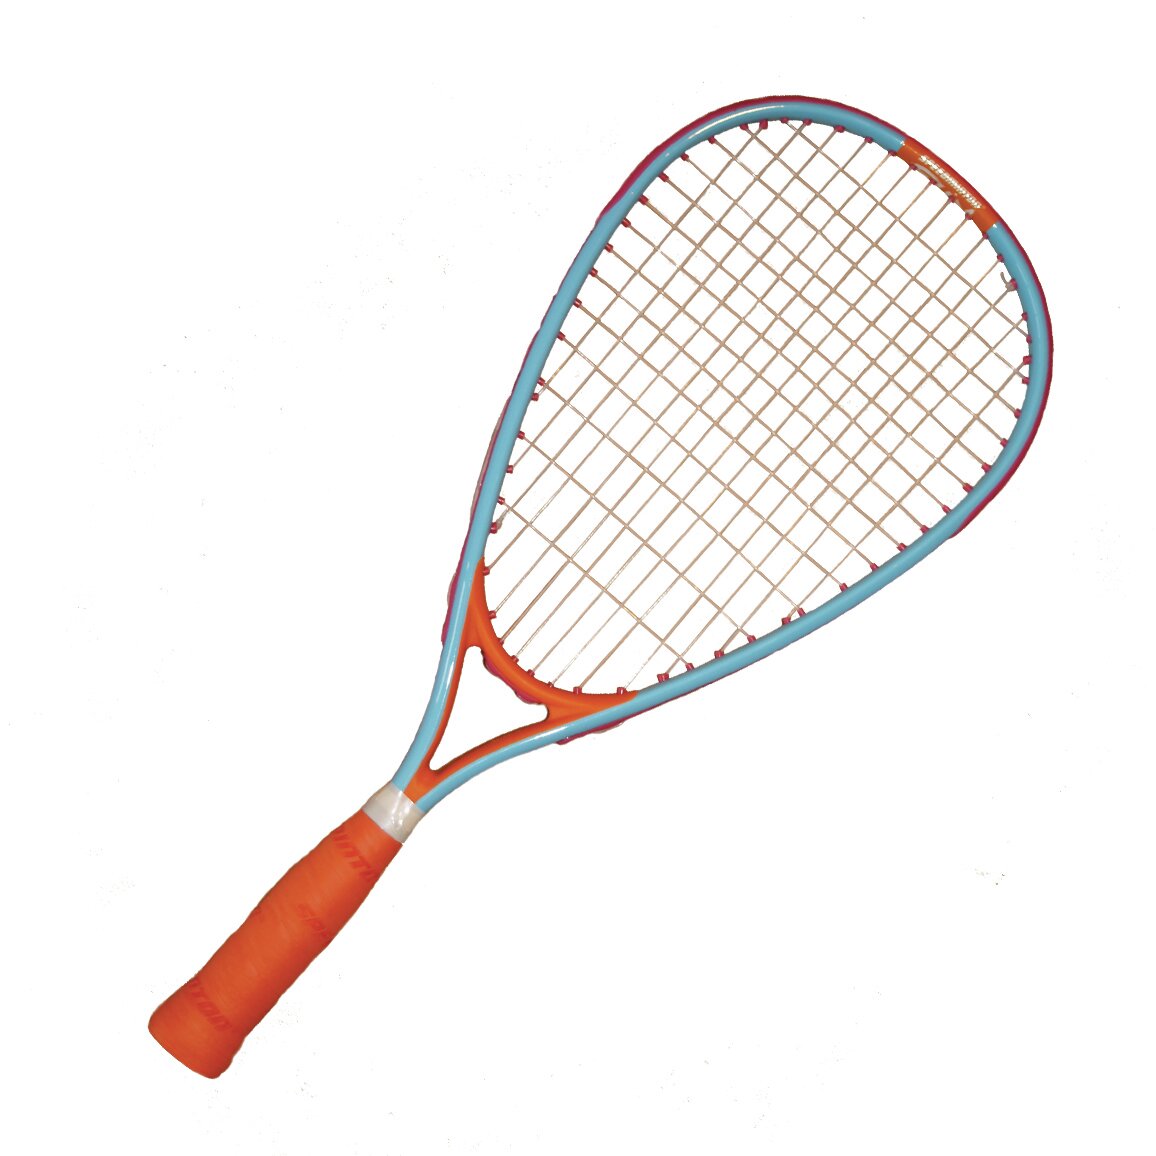 Strong sturdy rackets. Toy wood tennis rackets x4 